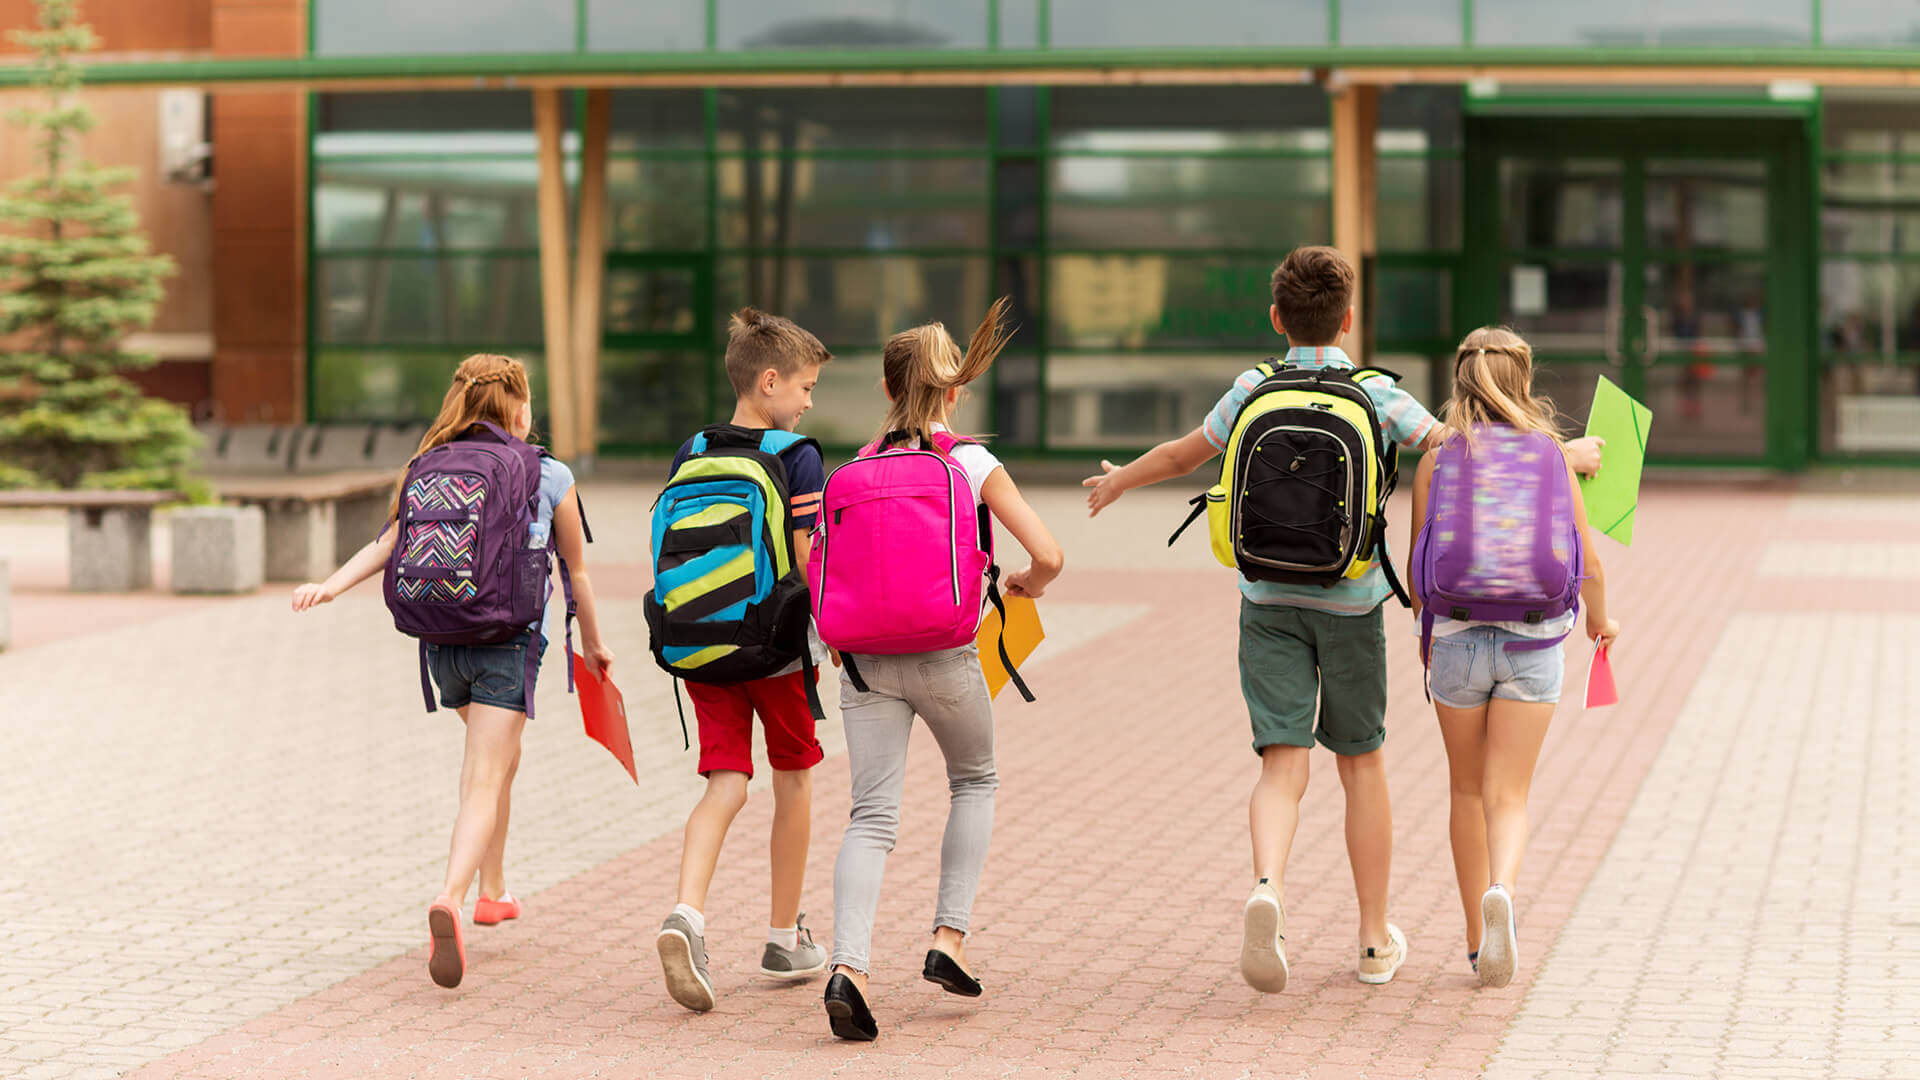 Winners with back-to-school shoppers are likely to see higher returns during holidays